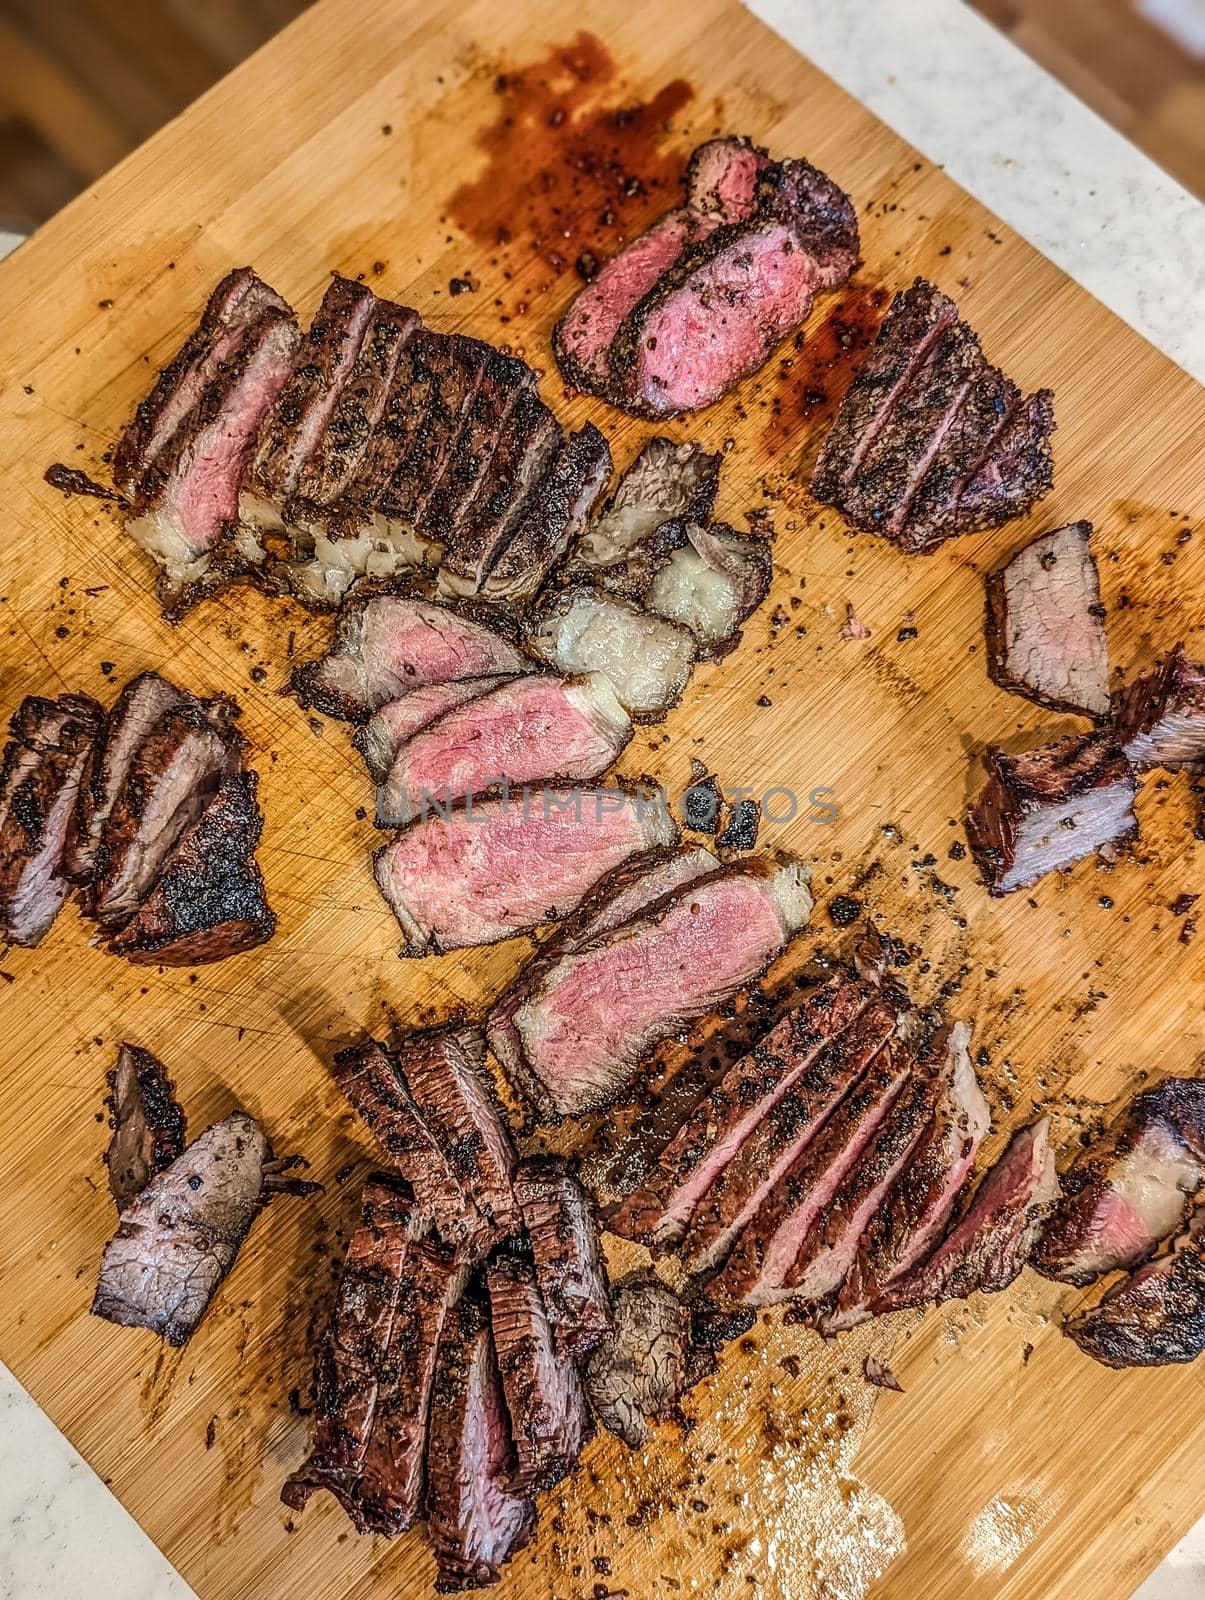 cooked and sliced to perfection 30 day dry aged ny strip beef and bison ribeye